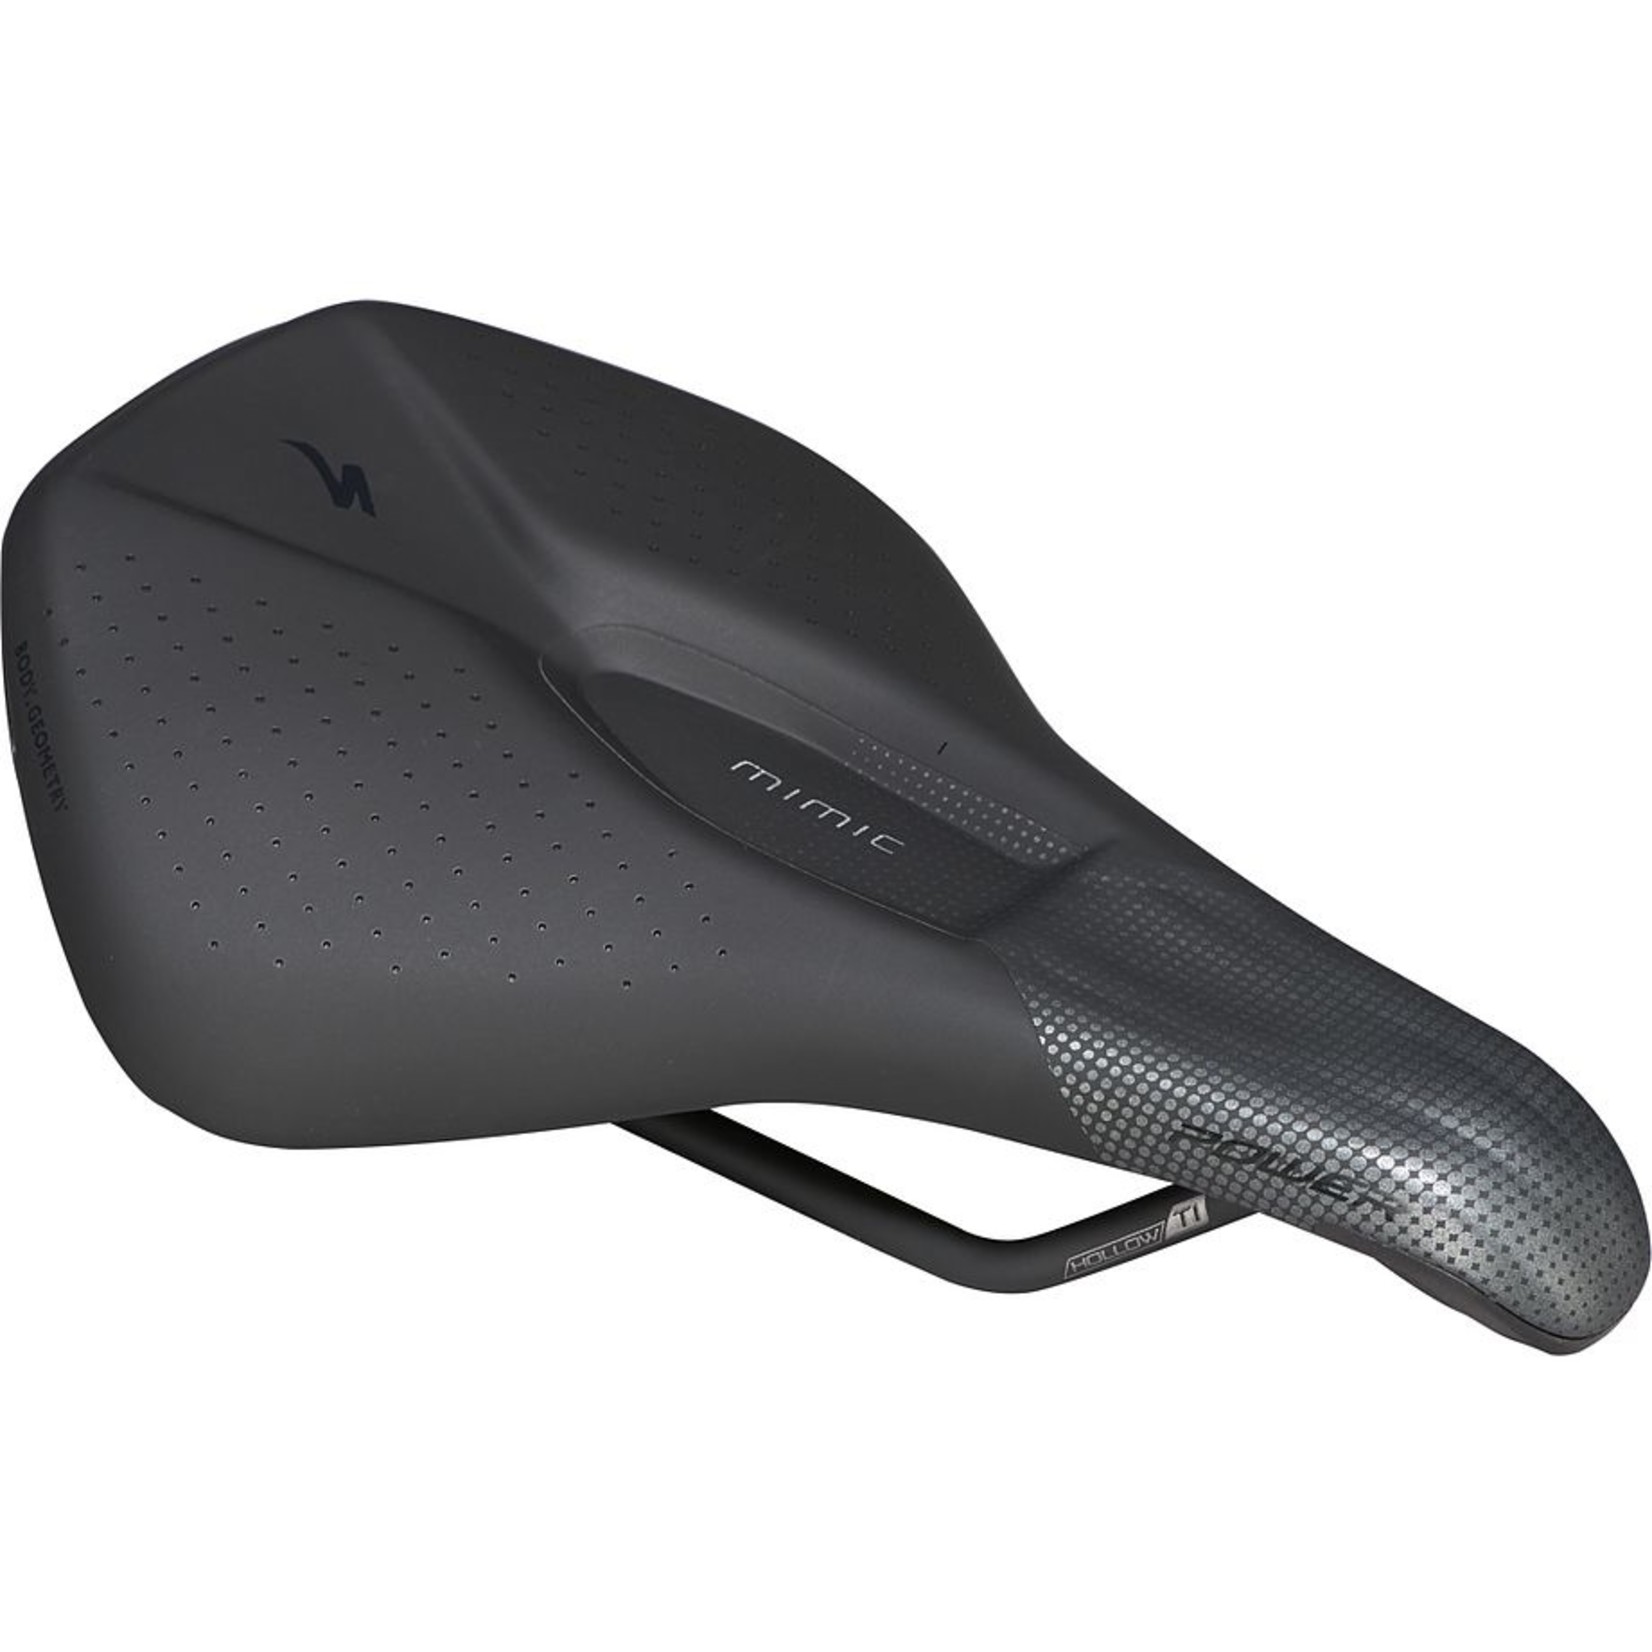 Specialized POWER EXPERT MIMIC SADDLE BLK 155 155mm